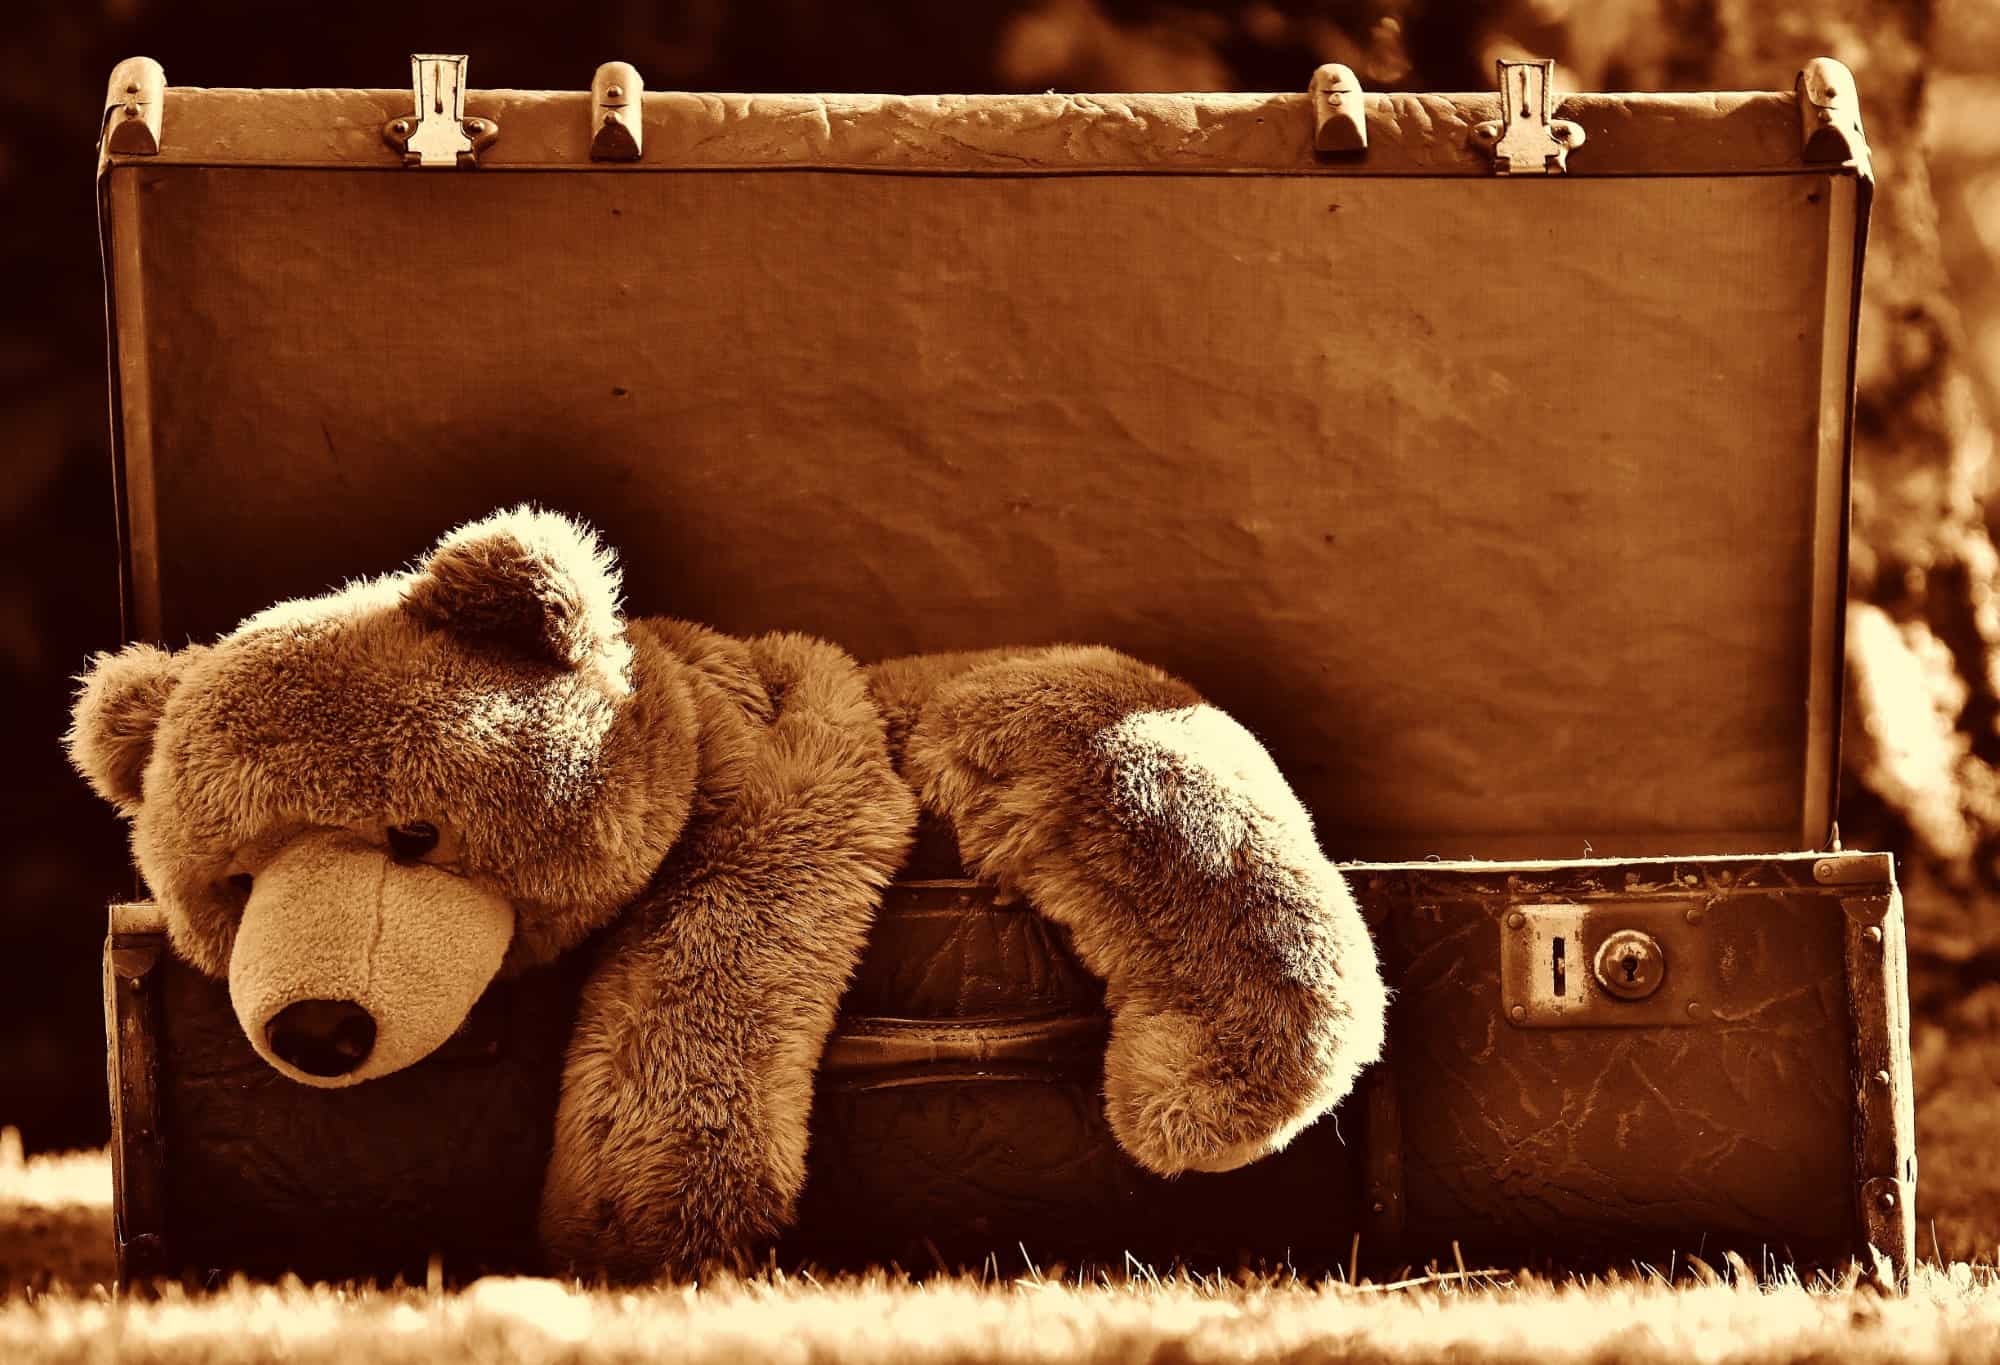 Old brown suitcase with large teddy bear hanging out the front.